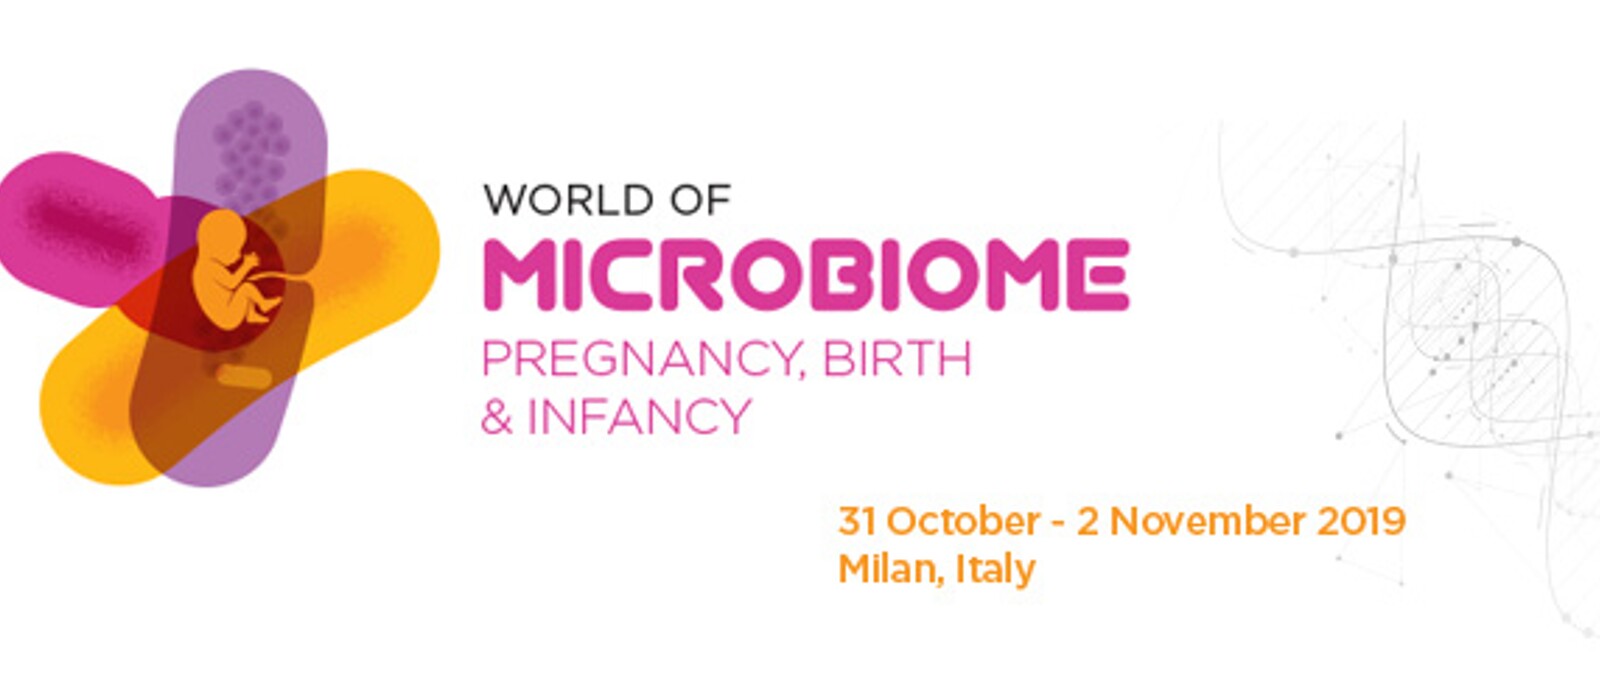 World of Microbiome